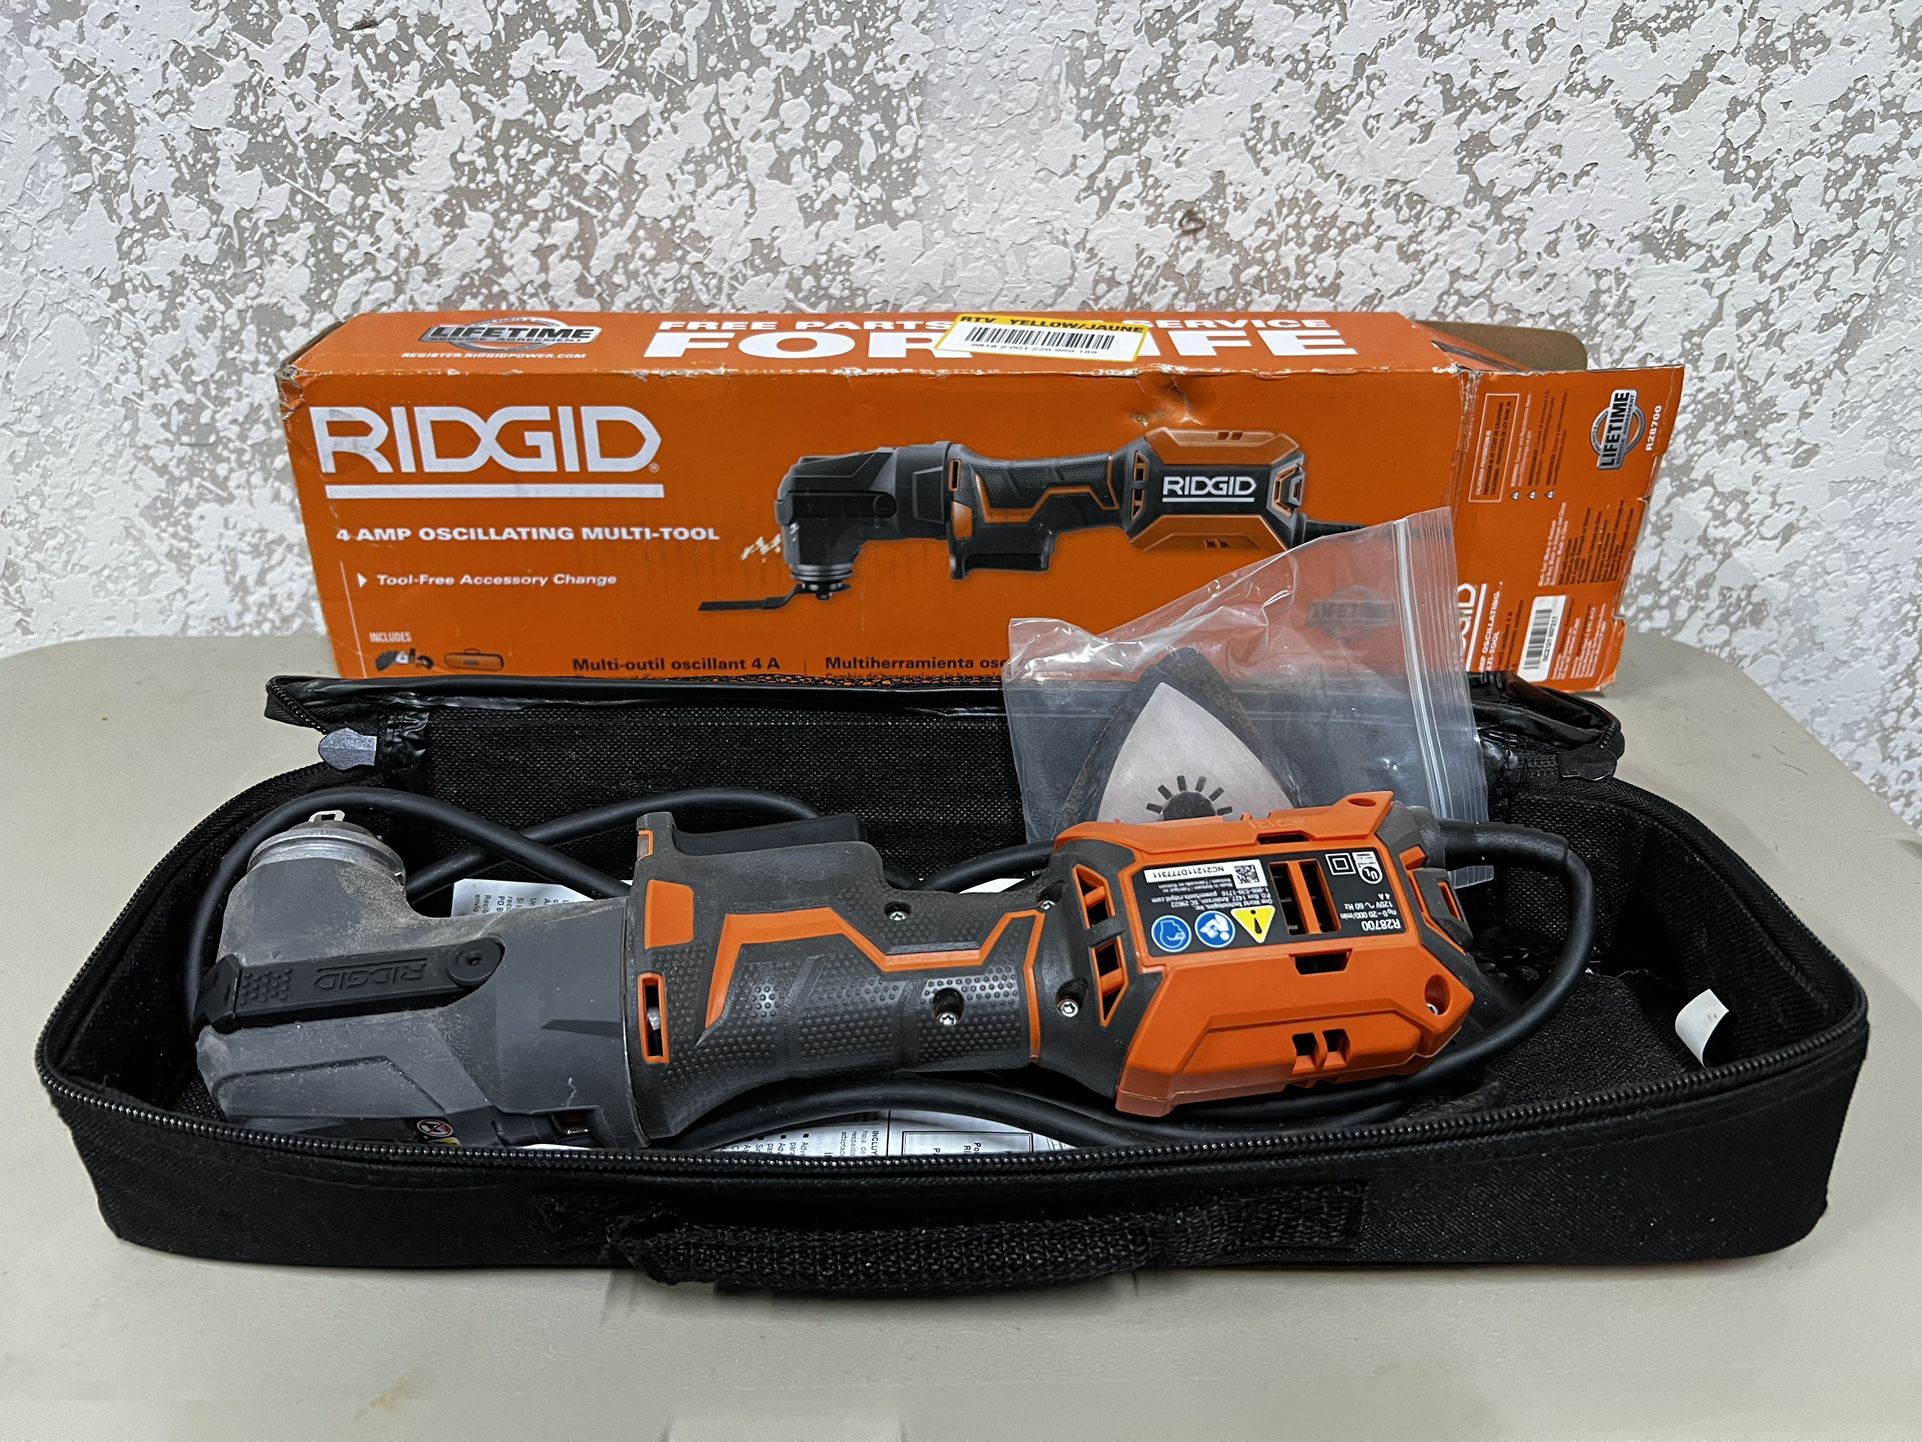 Ridgid Amp Corded Oscillating Multi-Tool for Sale in Conroe, TX OfferUp